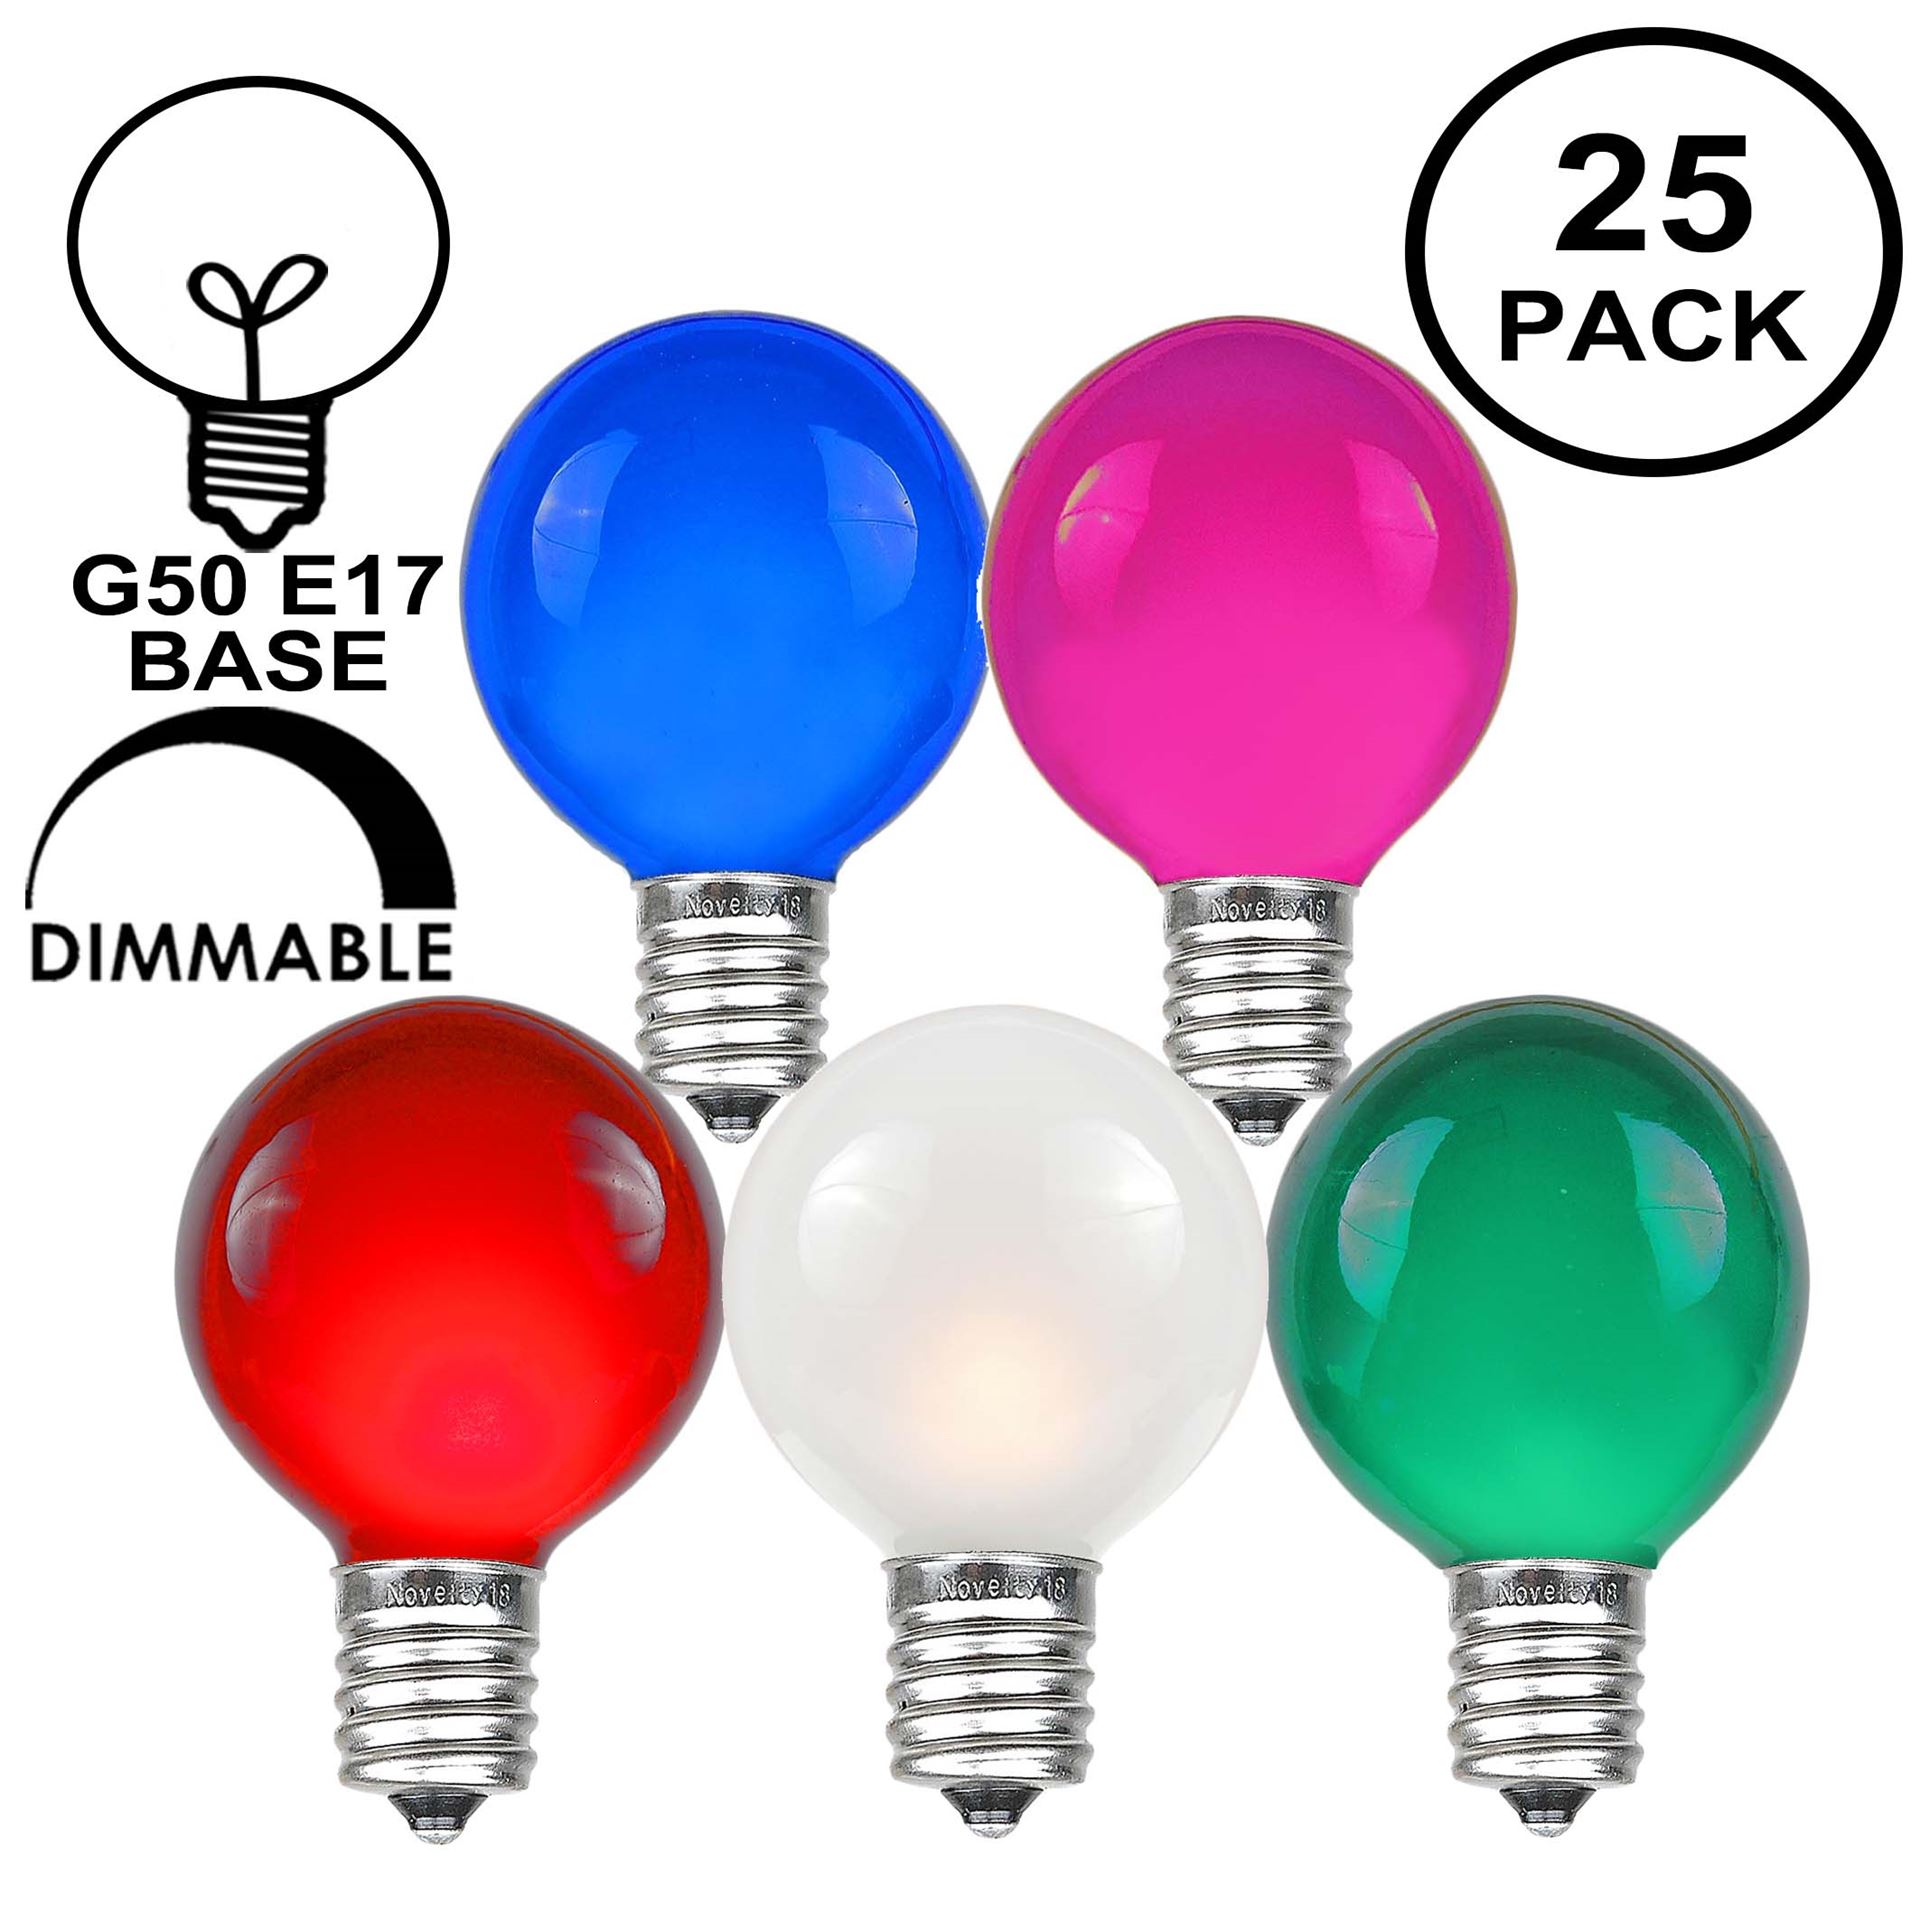 G40 and G50 Replacement Light Bulbs Assorted Satin C7 Base G30 Box of 25 